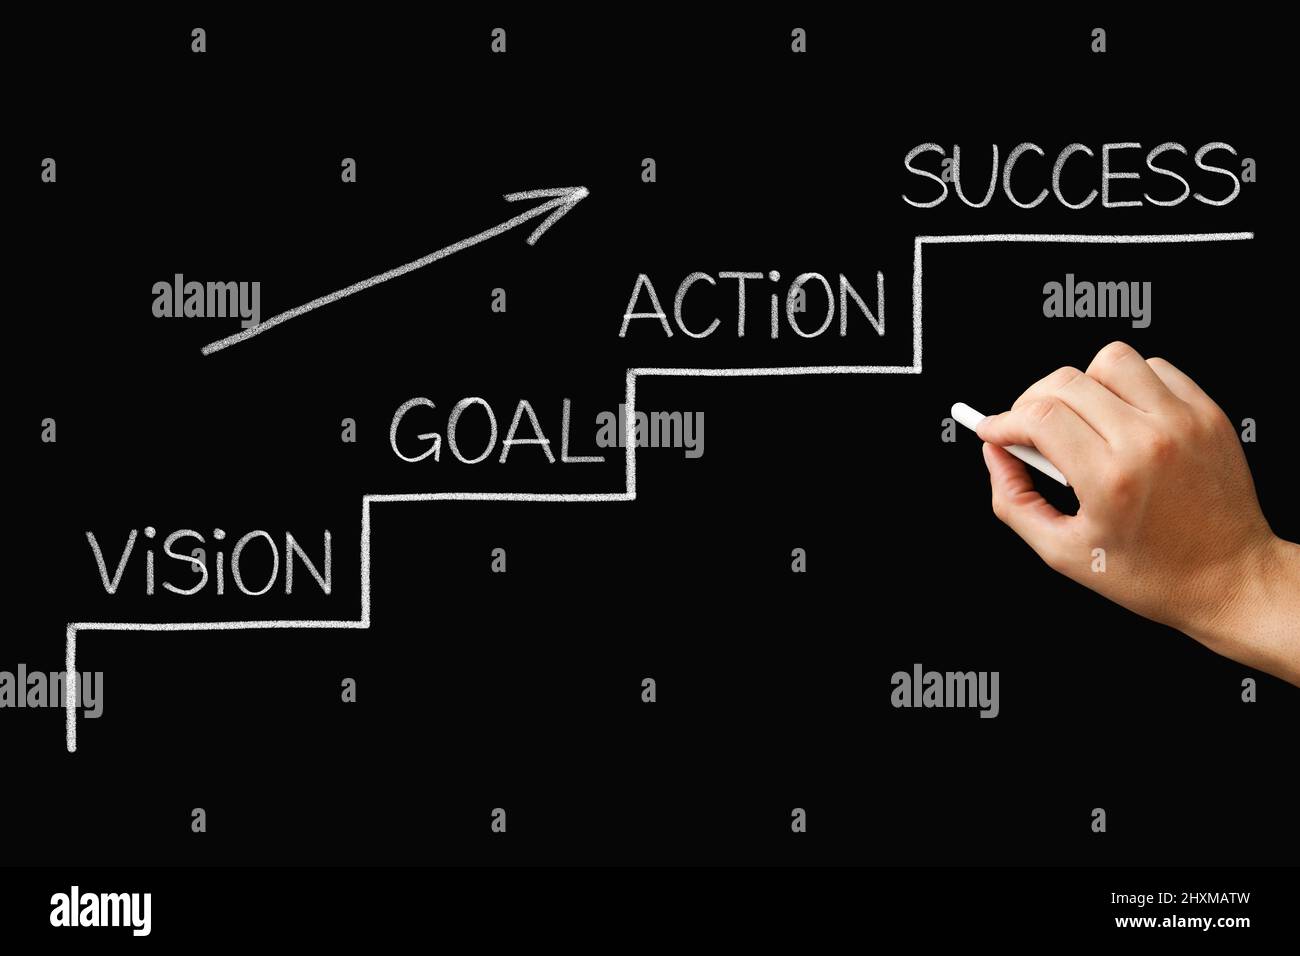 Hand drawing a stairway to success concept with steps from vision through setting goals, taking action and achieving success. Stock Photo